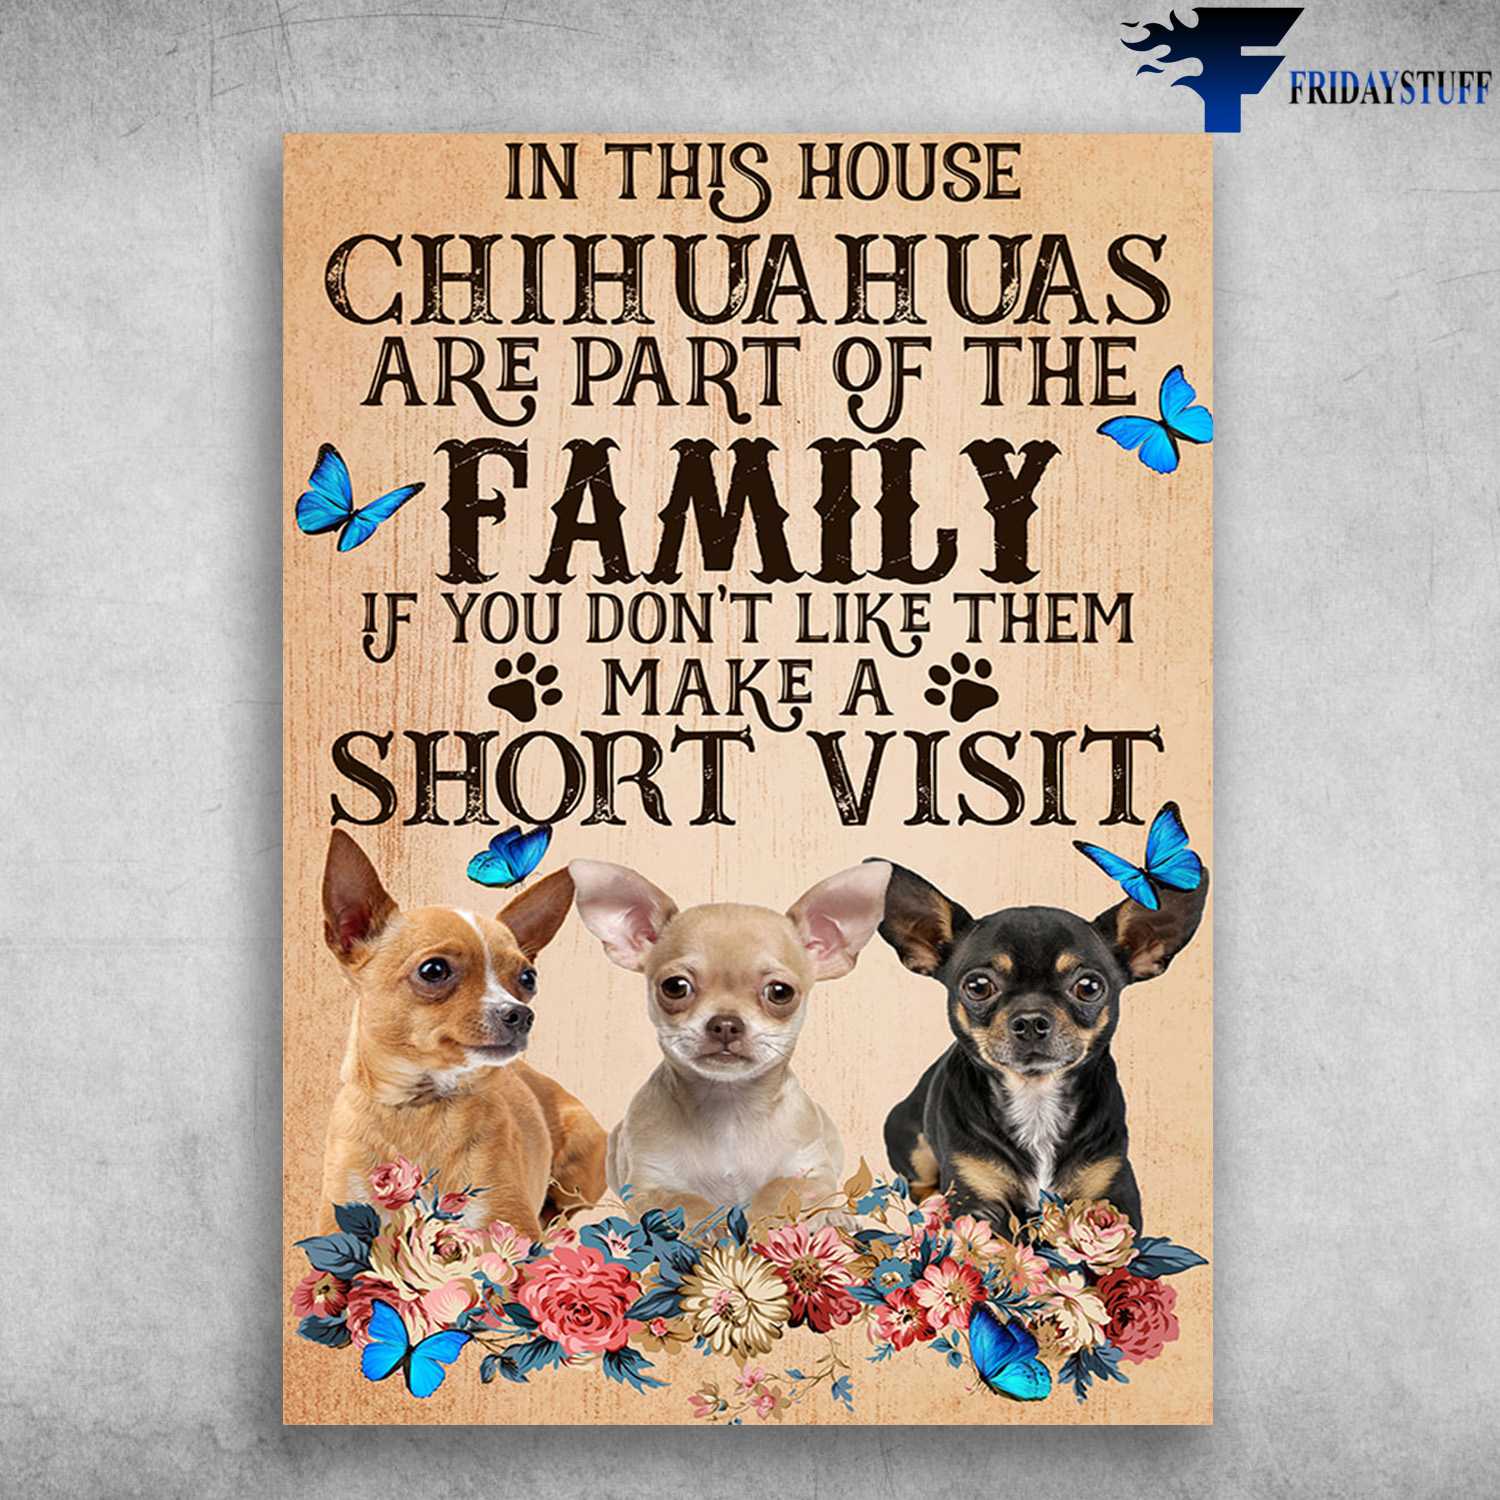 Chihuahuas Family, Dog Lover, Butterfly Flower - In This House, Chihuahuas Are Part Of The Family, If You Don't Like Them, Make A Short Visit